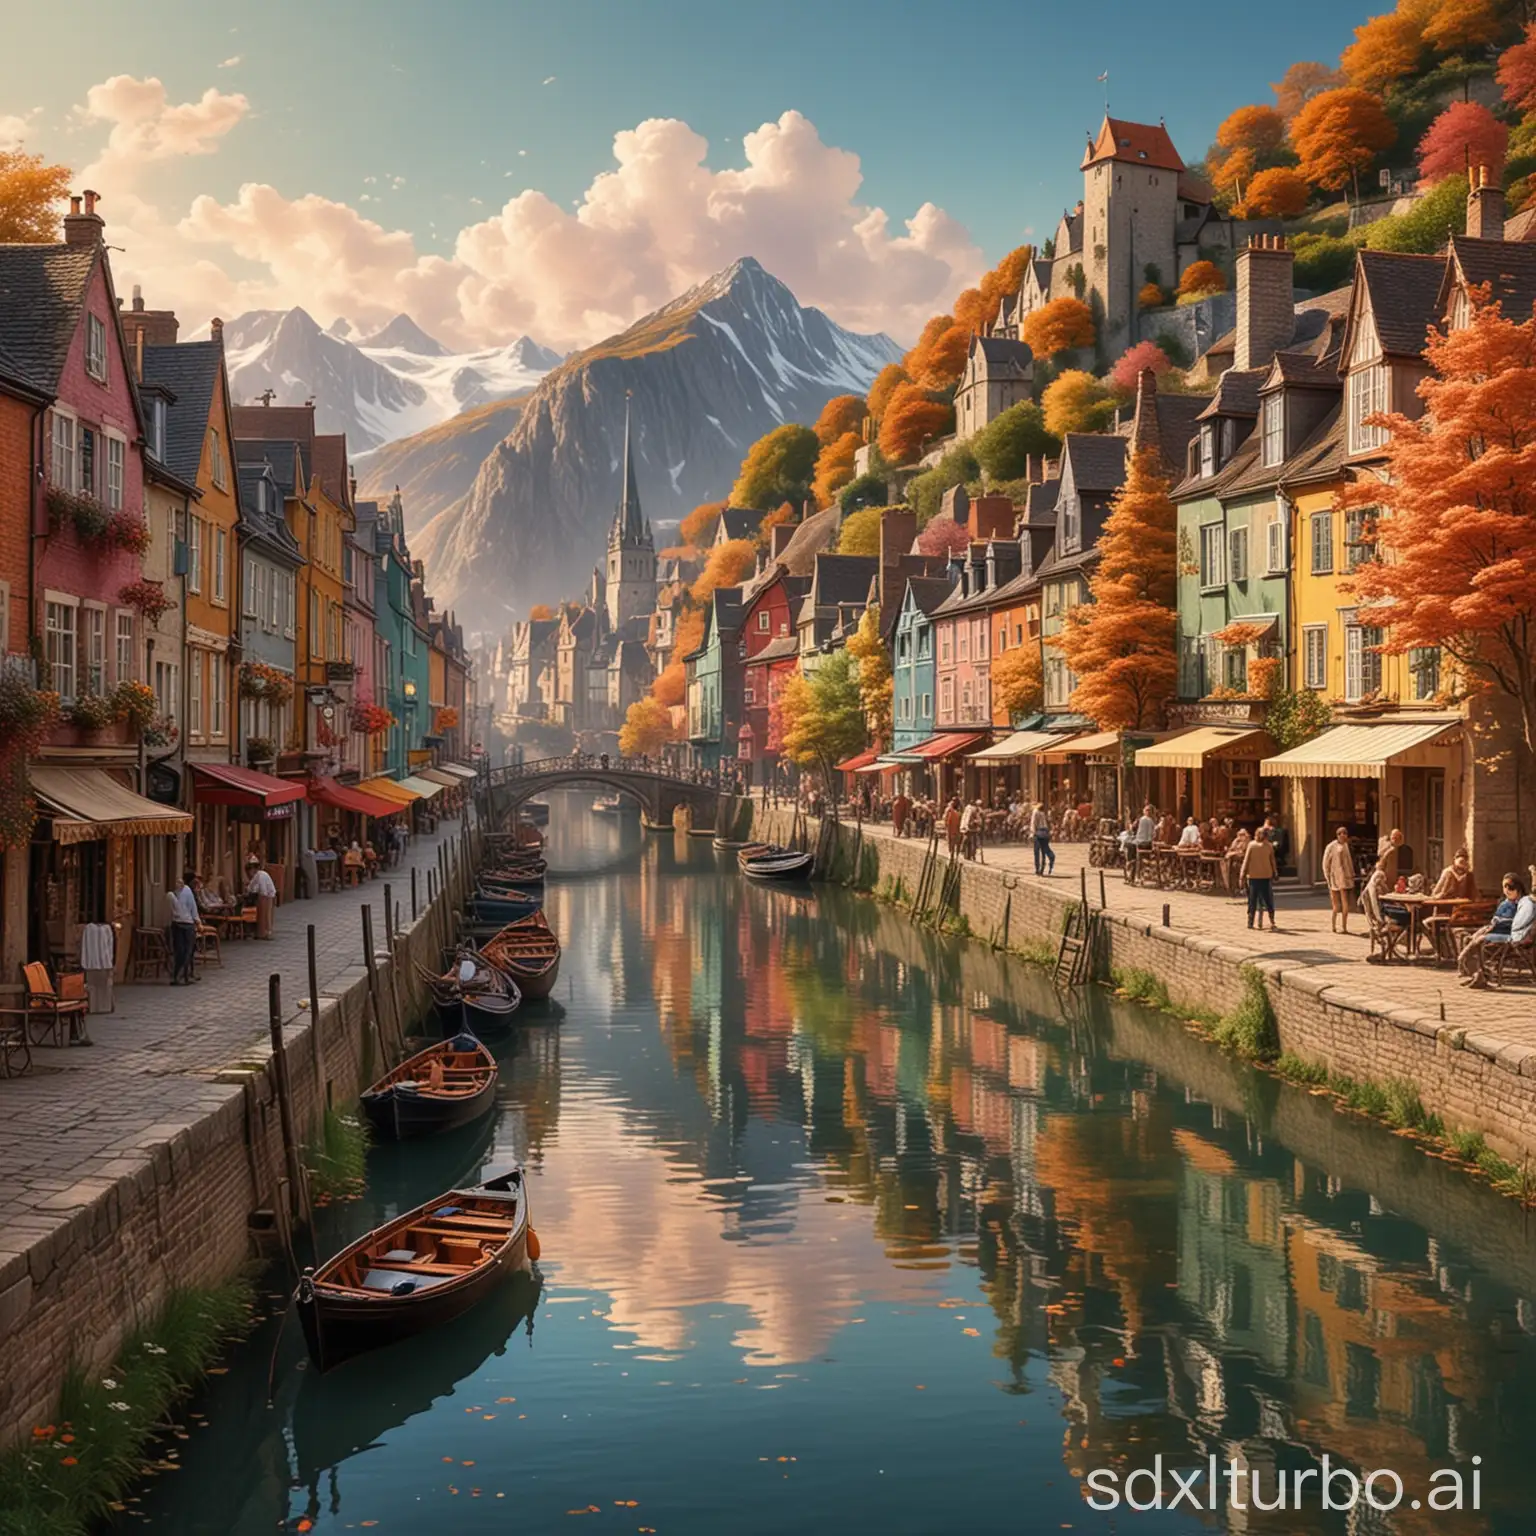 Your input is already in English, so here it is again with exactly the same capitalization: What Beautiful pictures the colours and the subjects are so clear and they look so spectacular It is a case of both colour and illustration being combined in the best possible way to be enjoyed.